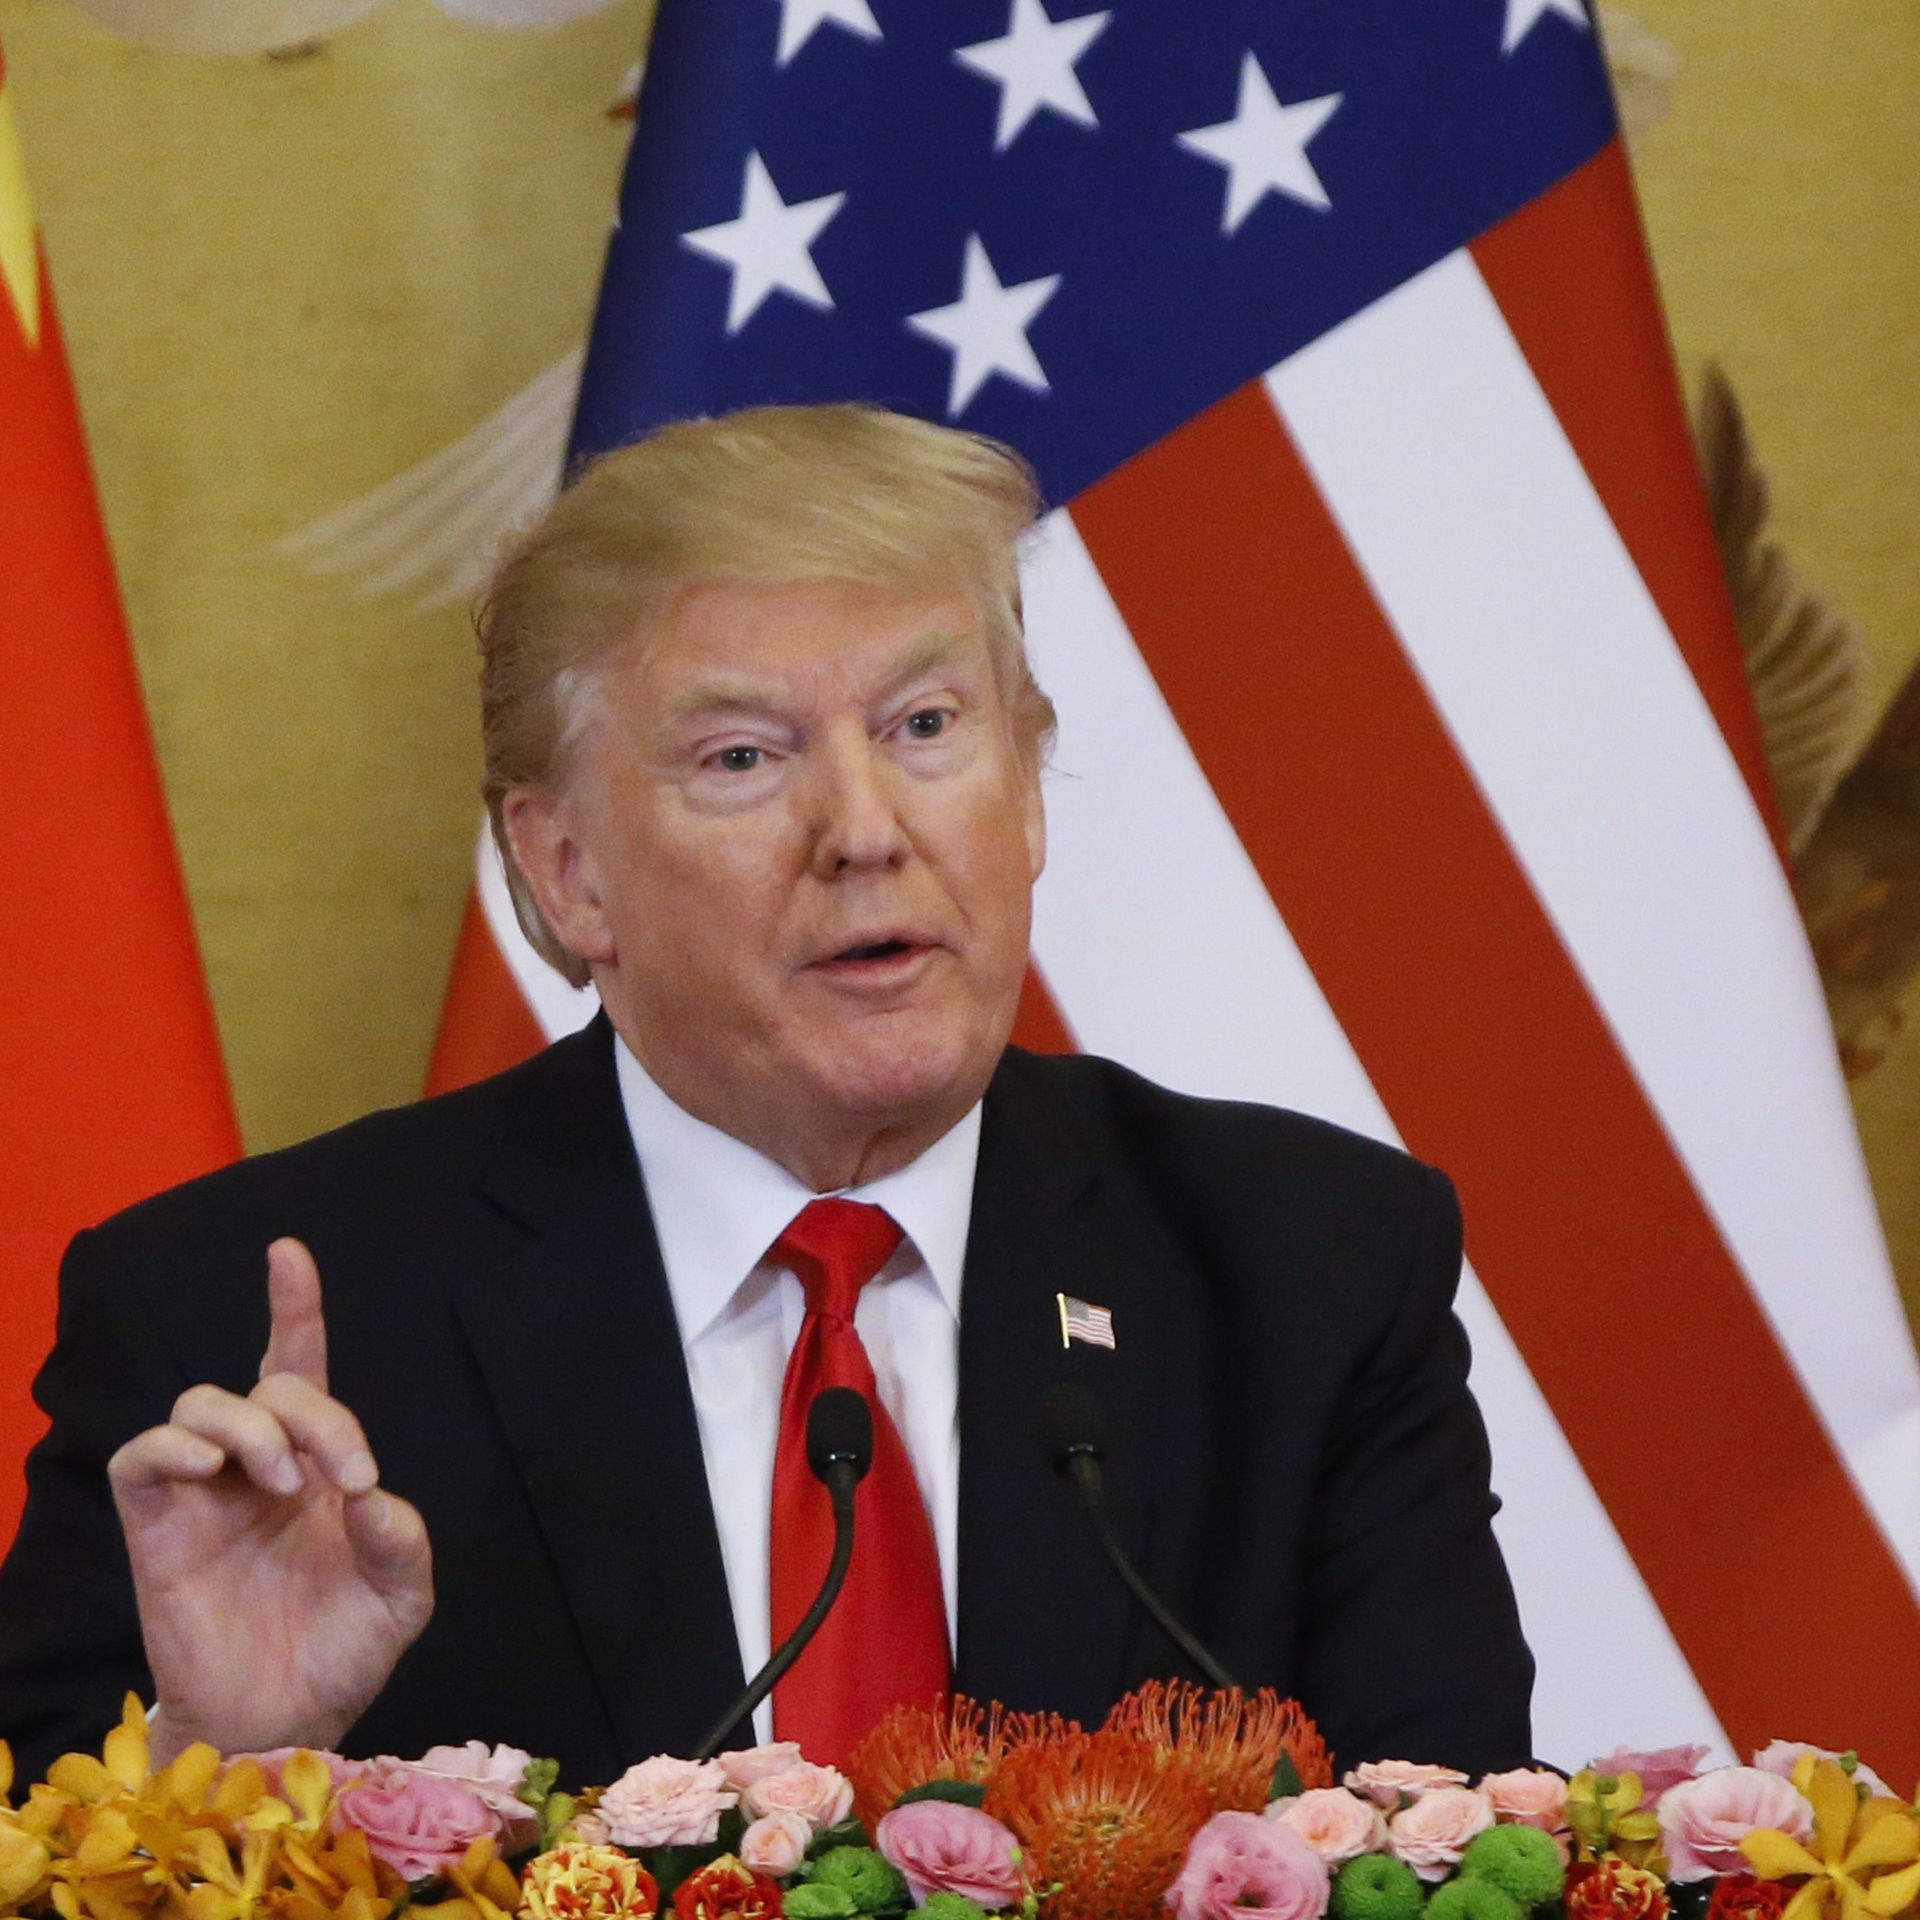 President Donald Trump and China's President Xi Jinping (not shown) make a joint statement at the Great Hall of the People on November 9, 2017 in Beijing, China.